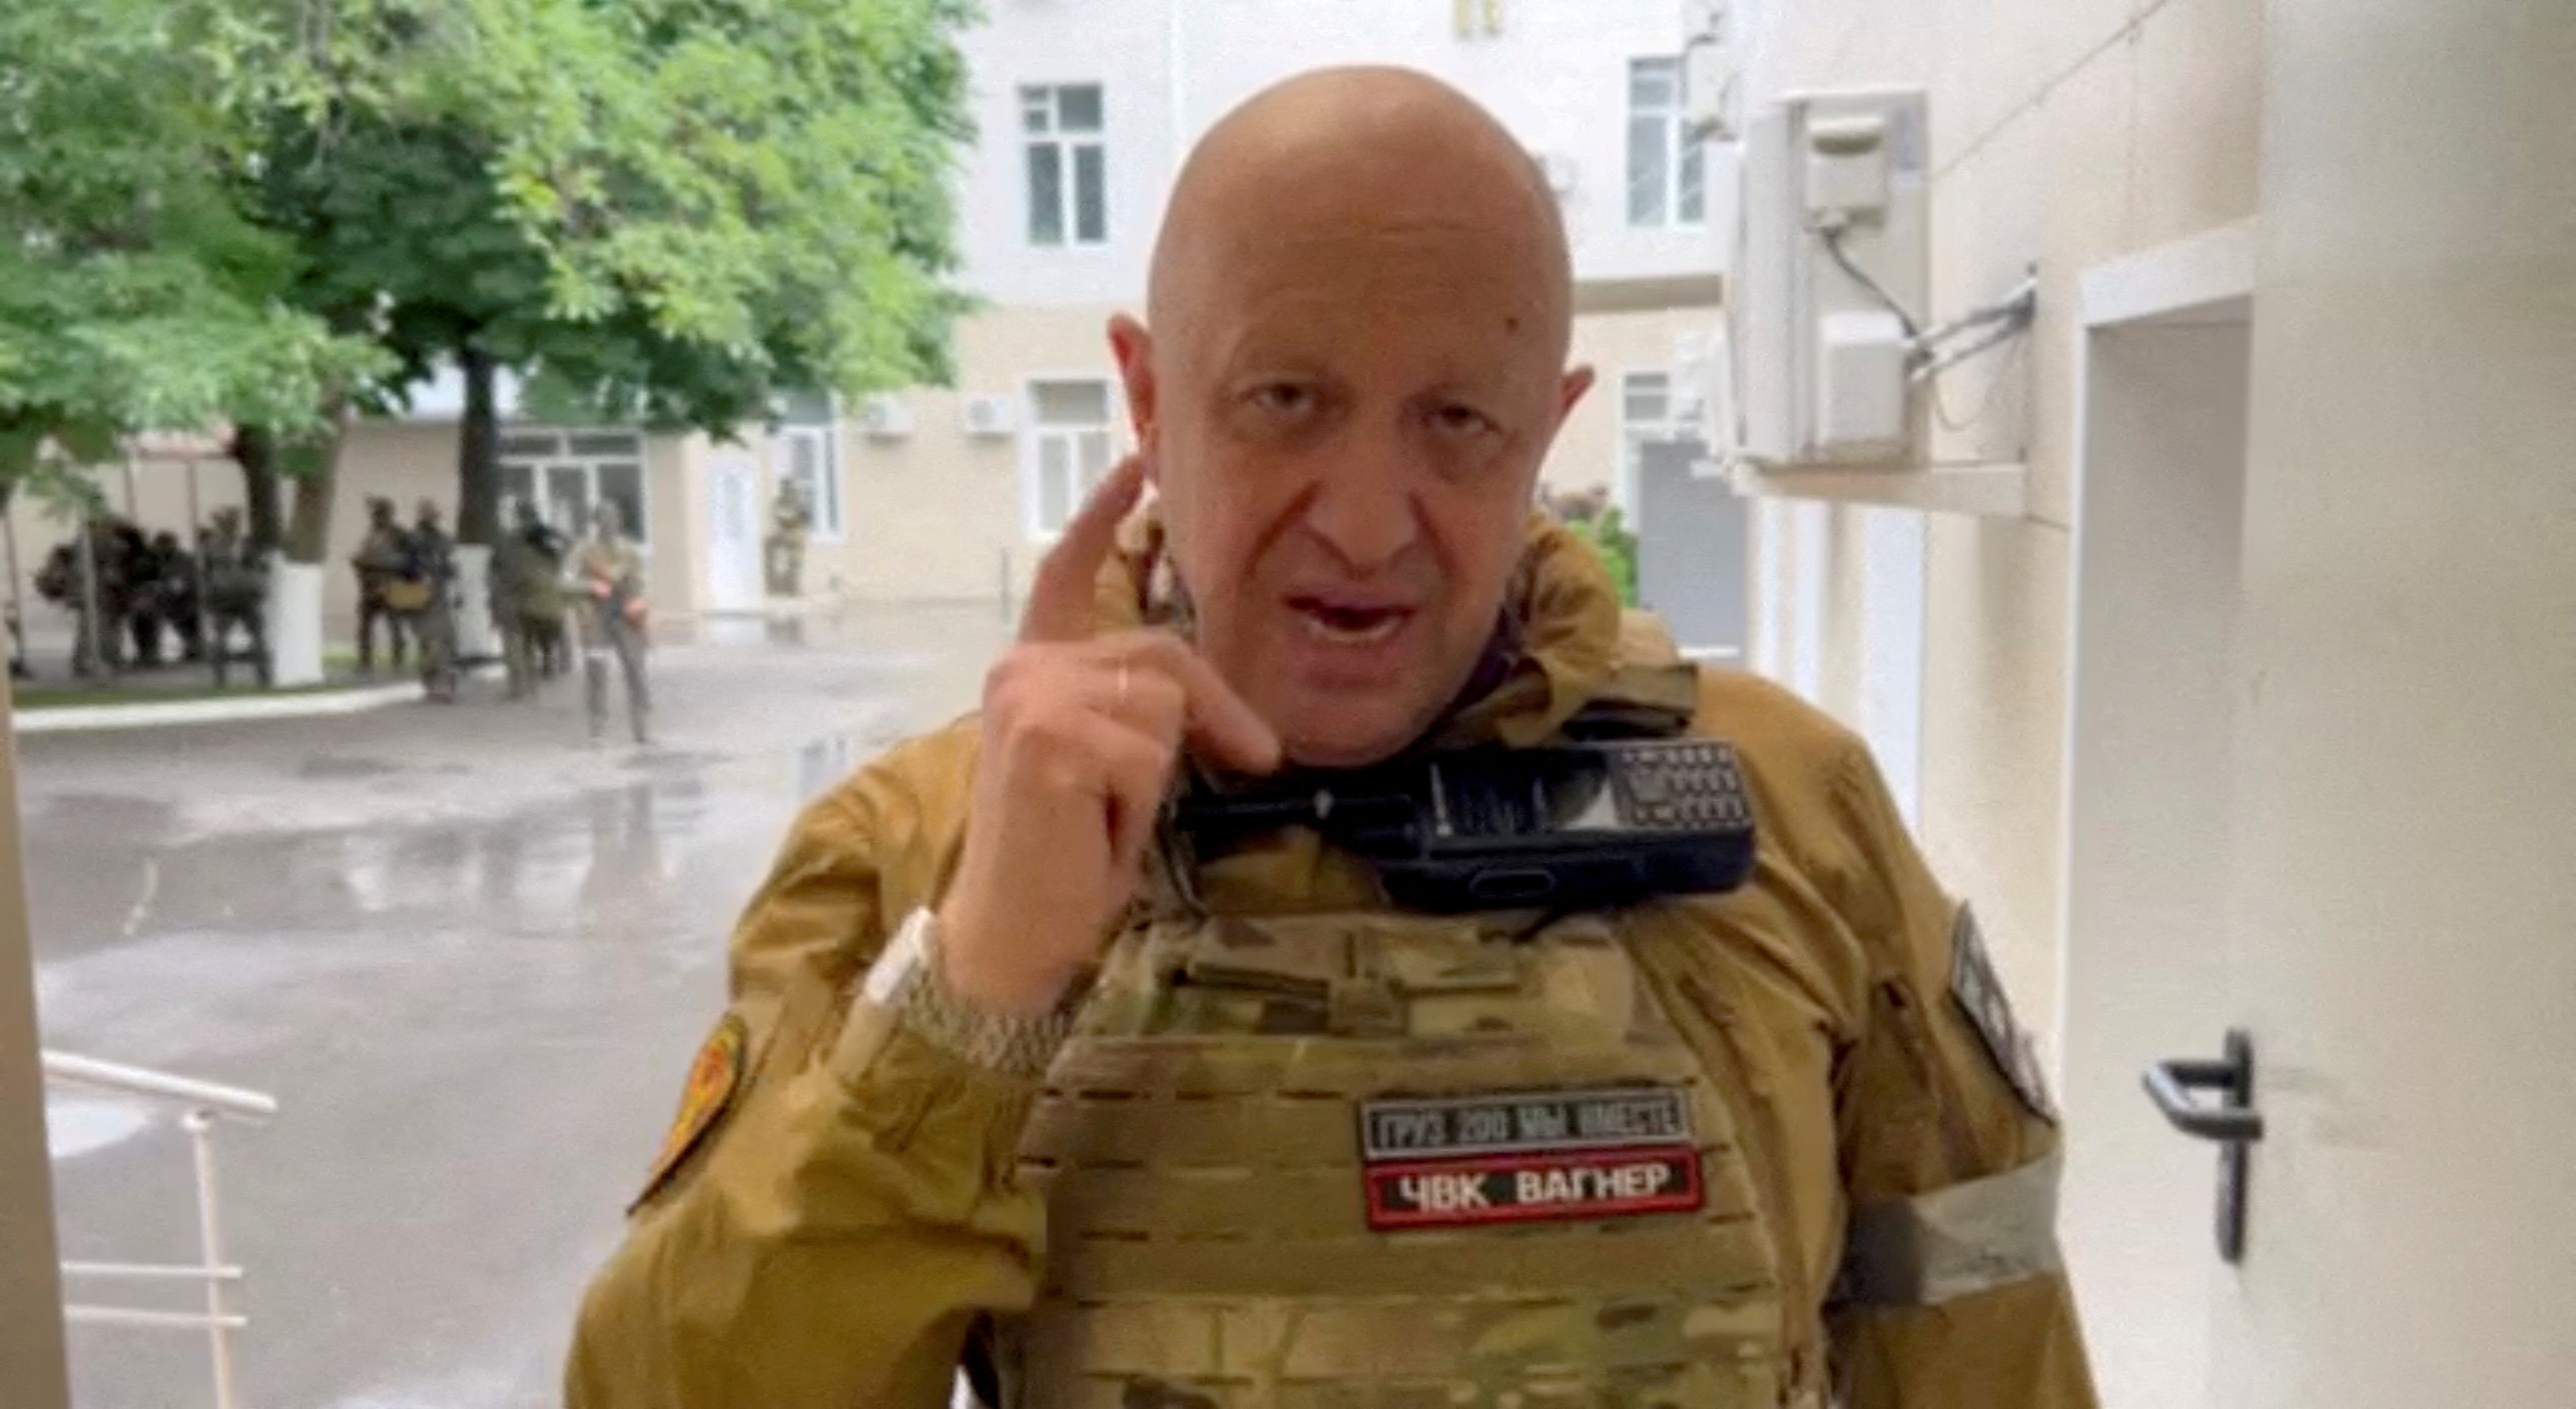 Yevgeny Prigozhin seized the Russian city of Rostov-on-Don last month and began to march on Moscow, before striking an 11th-hour deal apparently brokered by Belarusian president Alexander Lukashenko